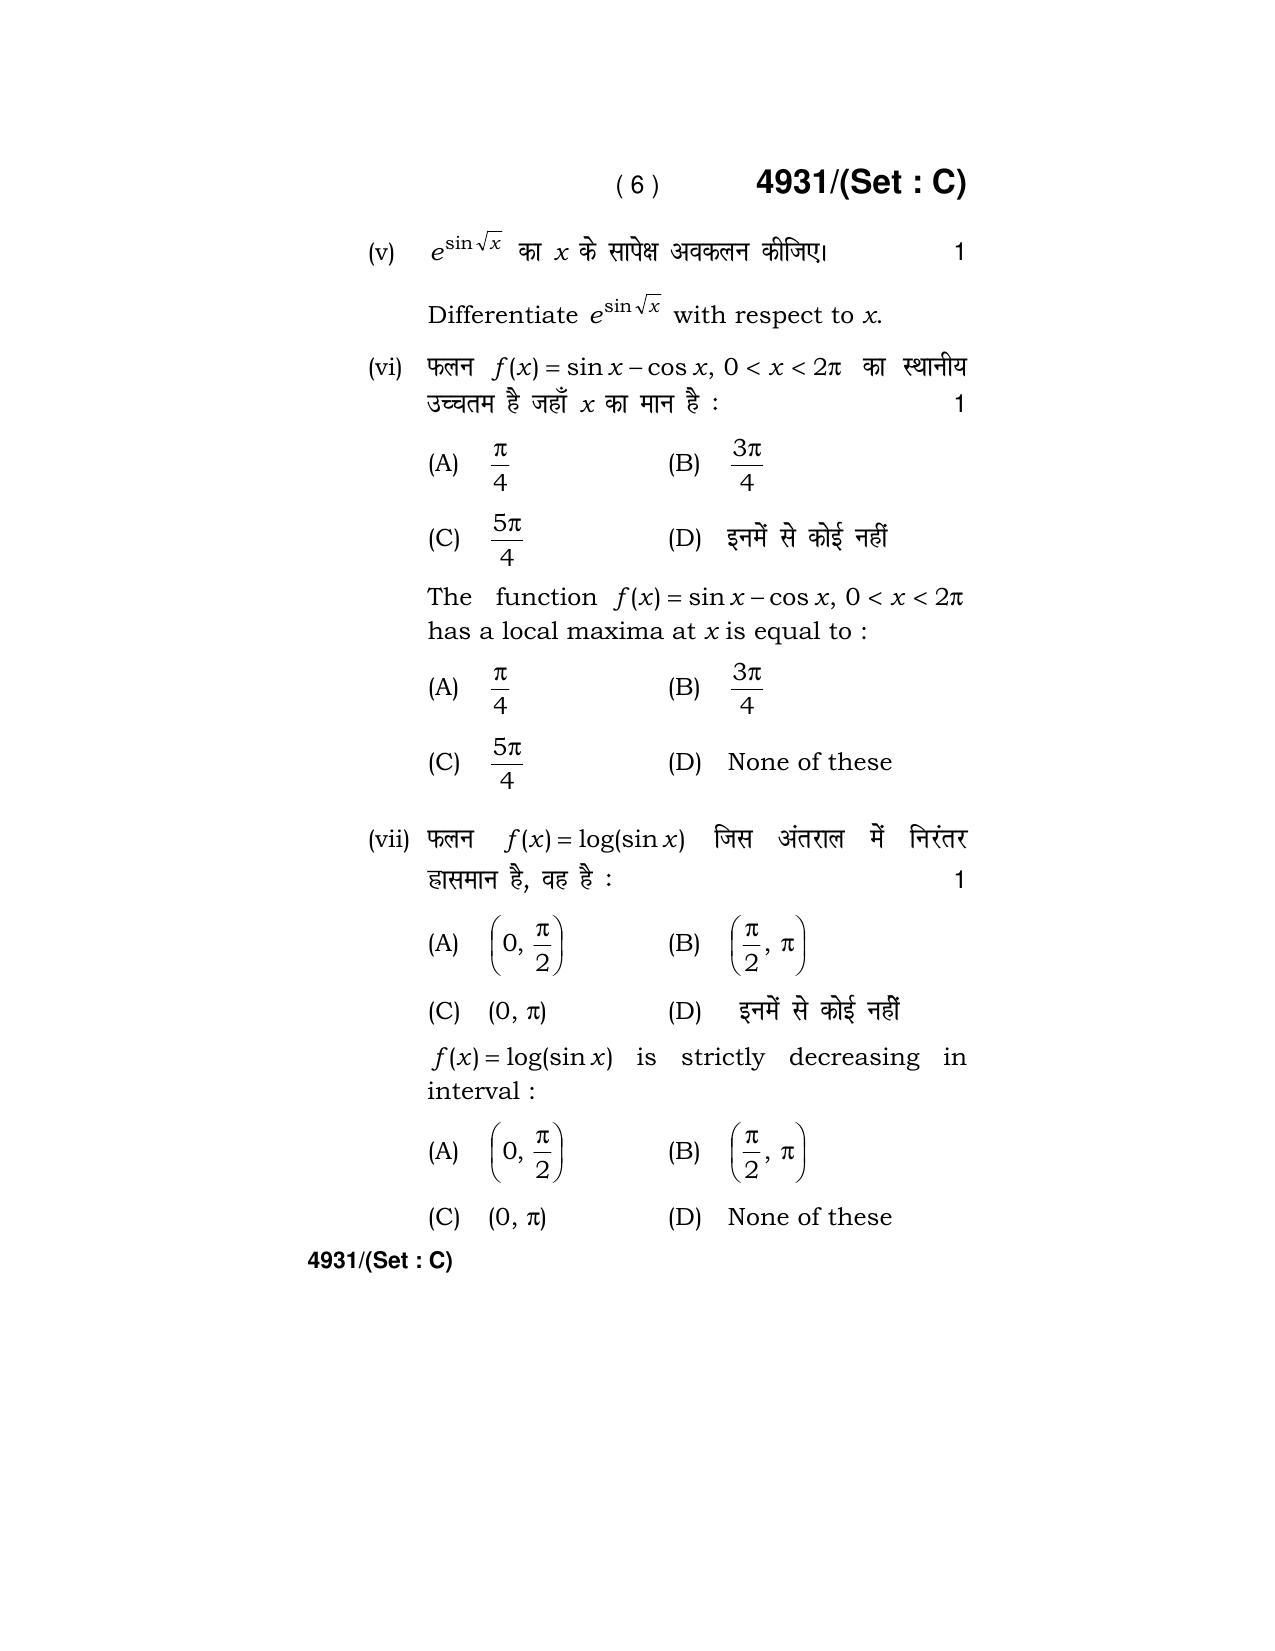 Haryana Board HBSE Class 12 Mathematics 2020 Question Paper - Page 38